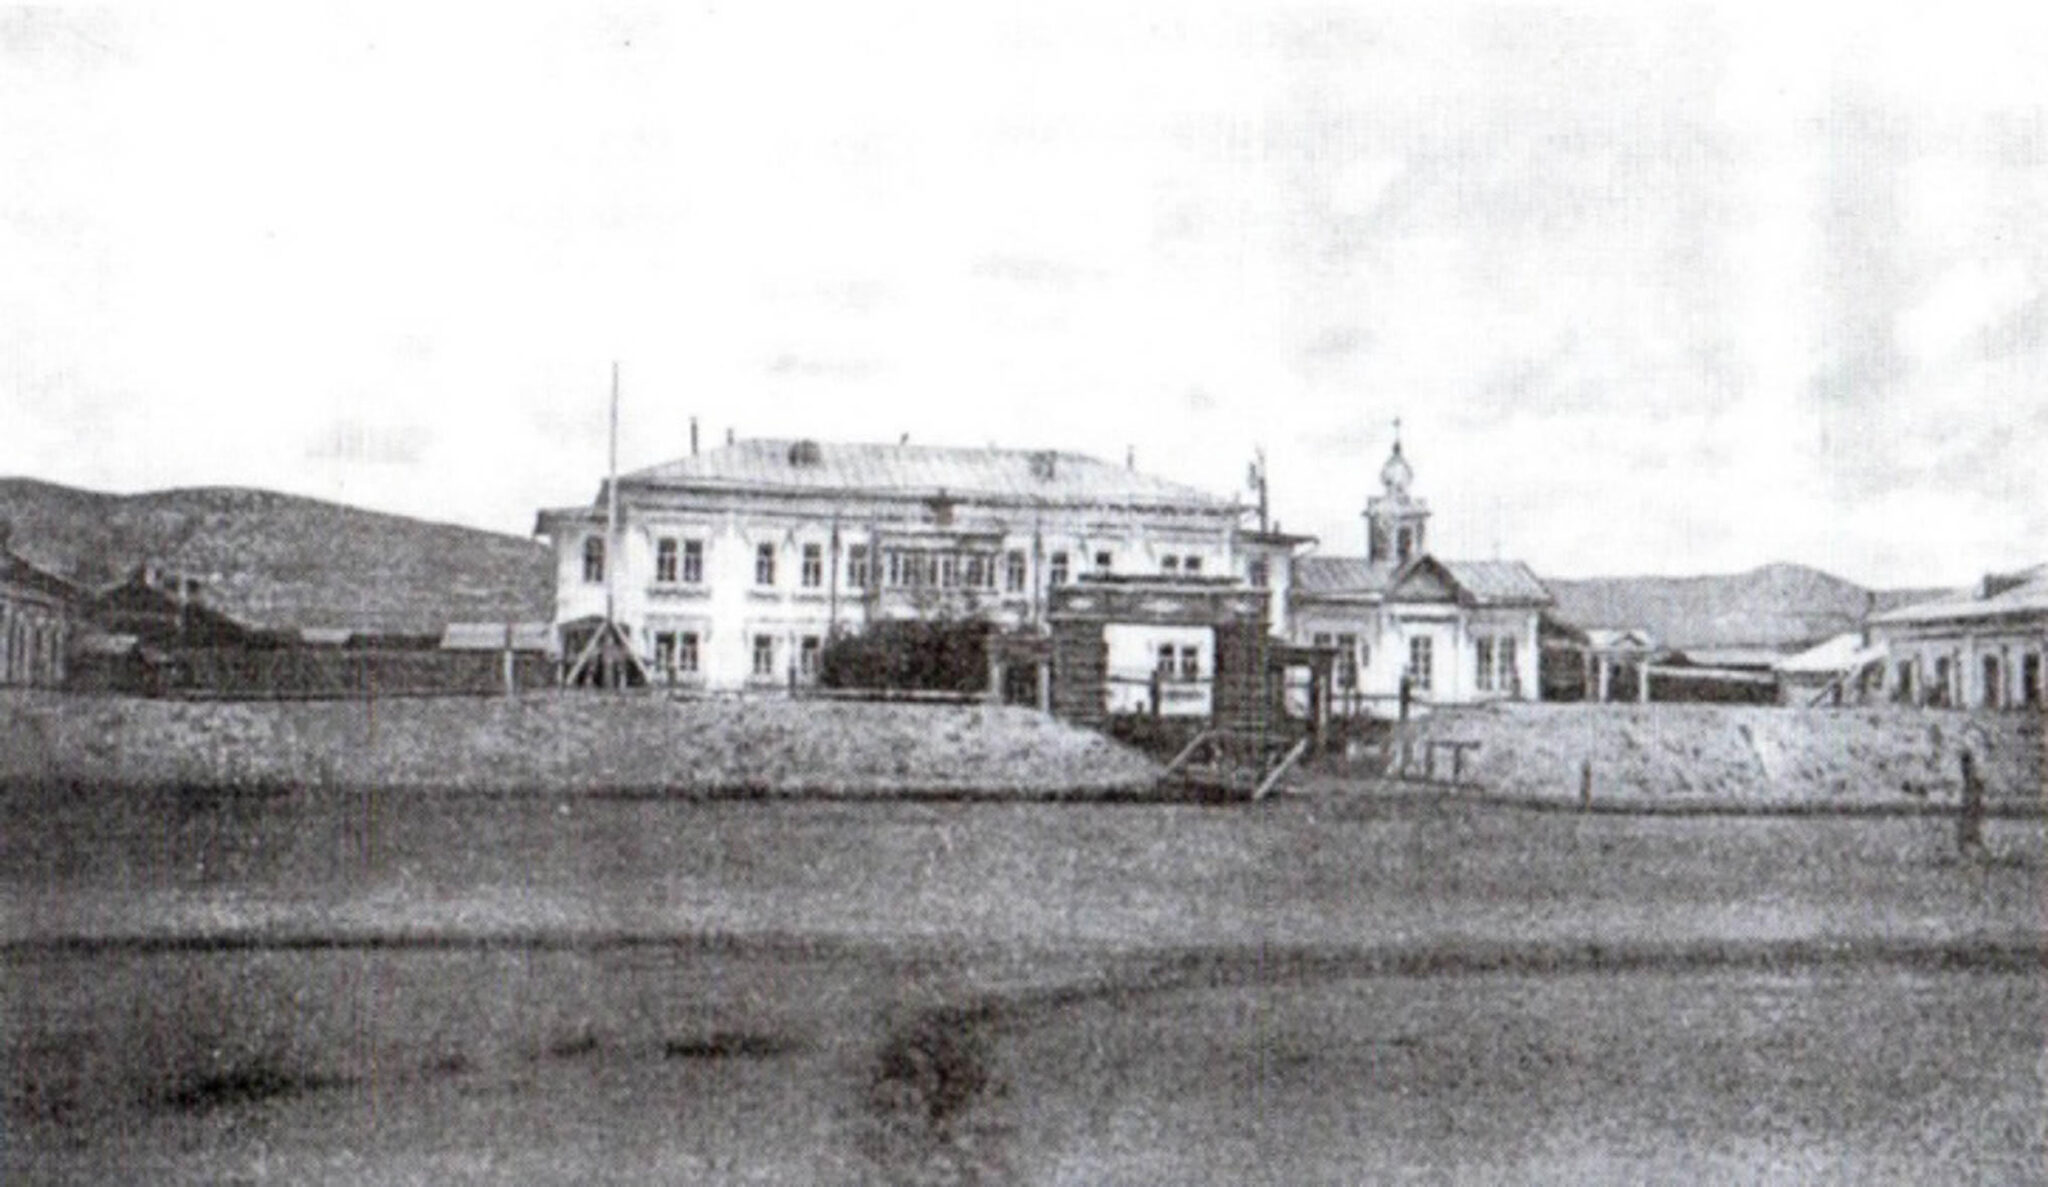 Black and white photograph of two-story building in Russian style; Onion dome atop structure at right